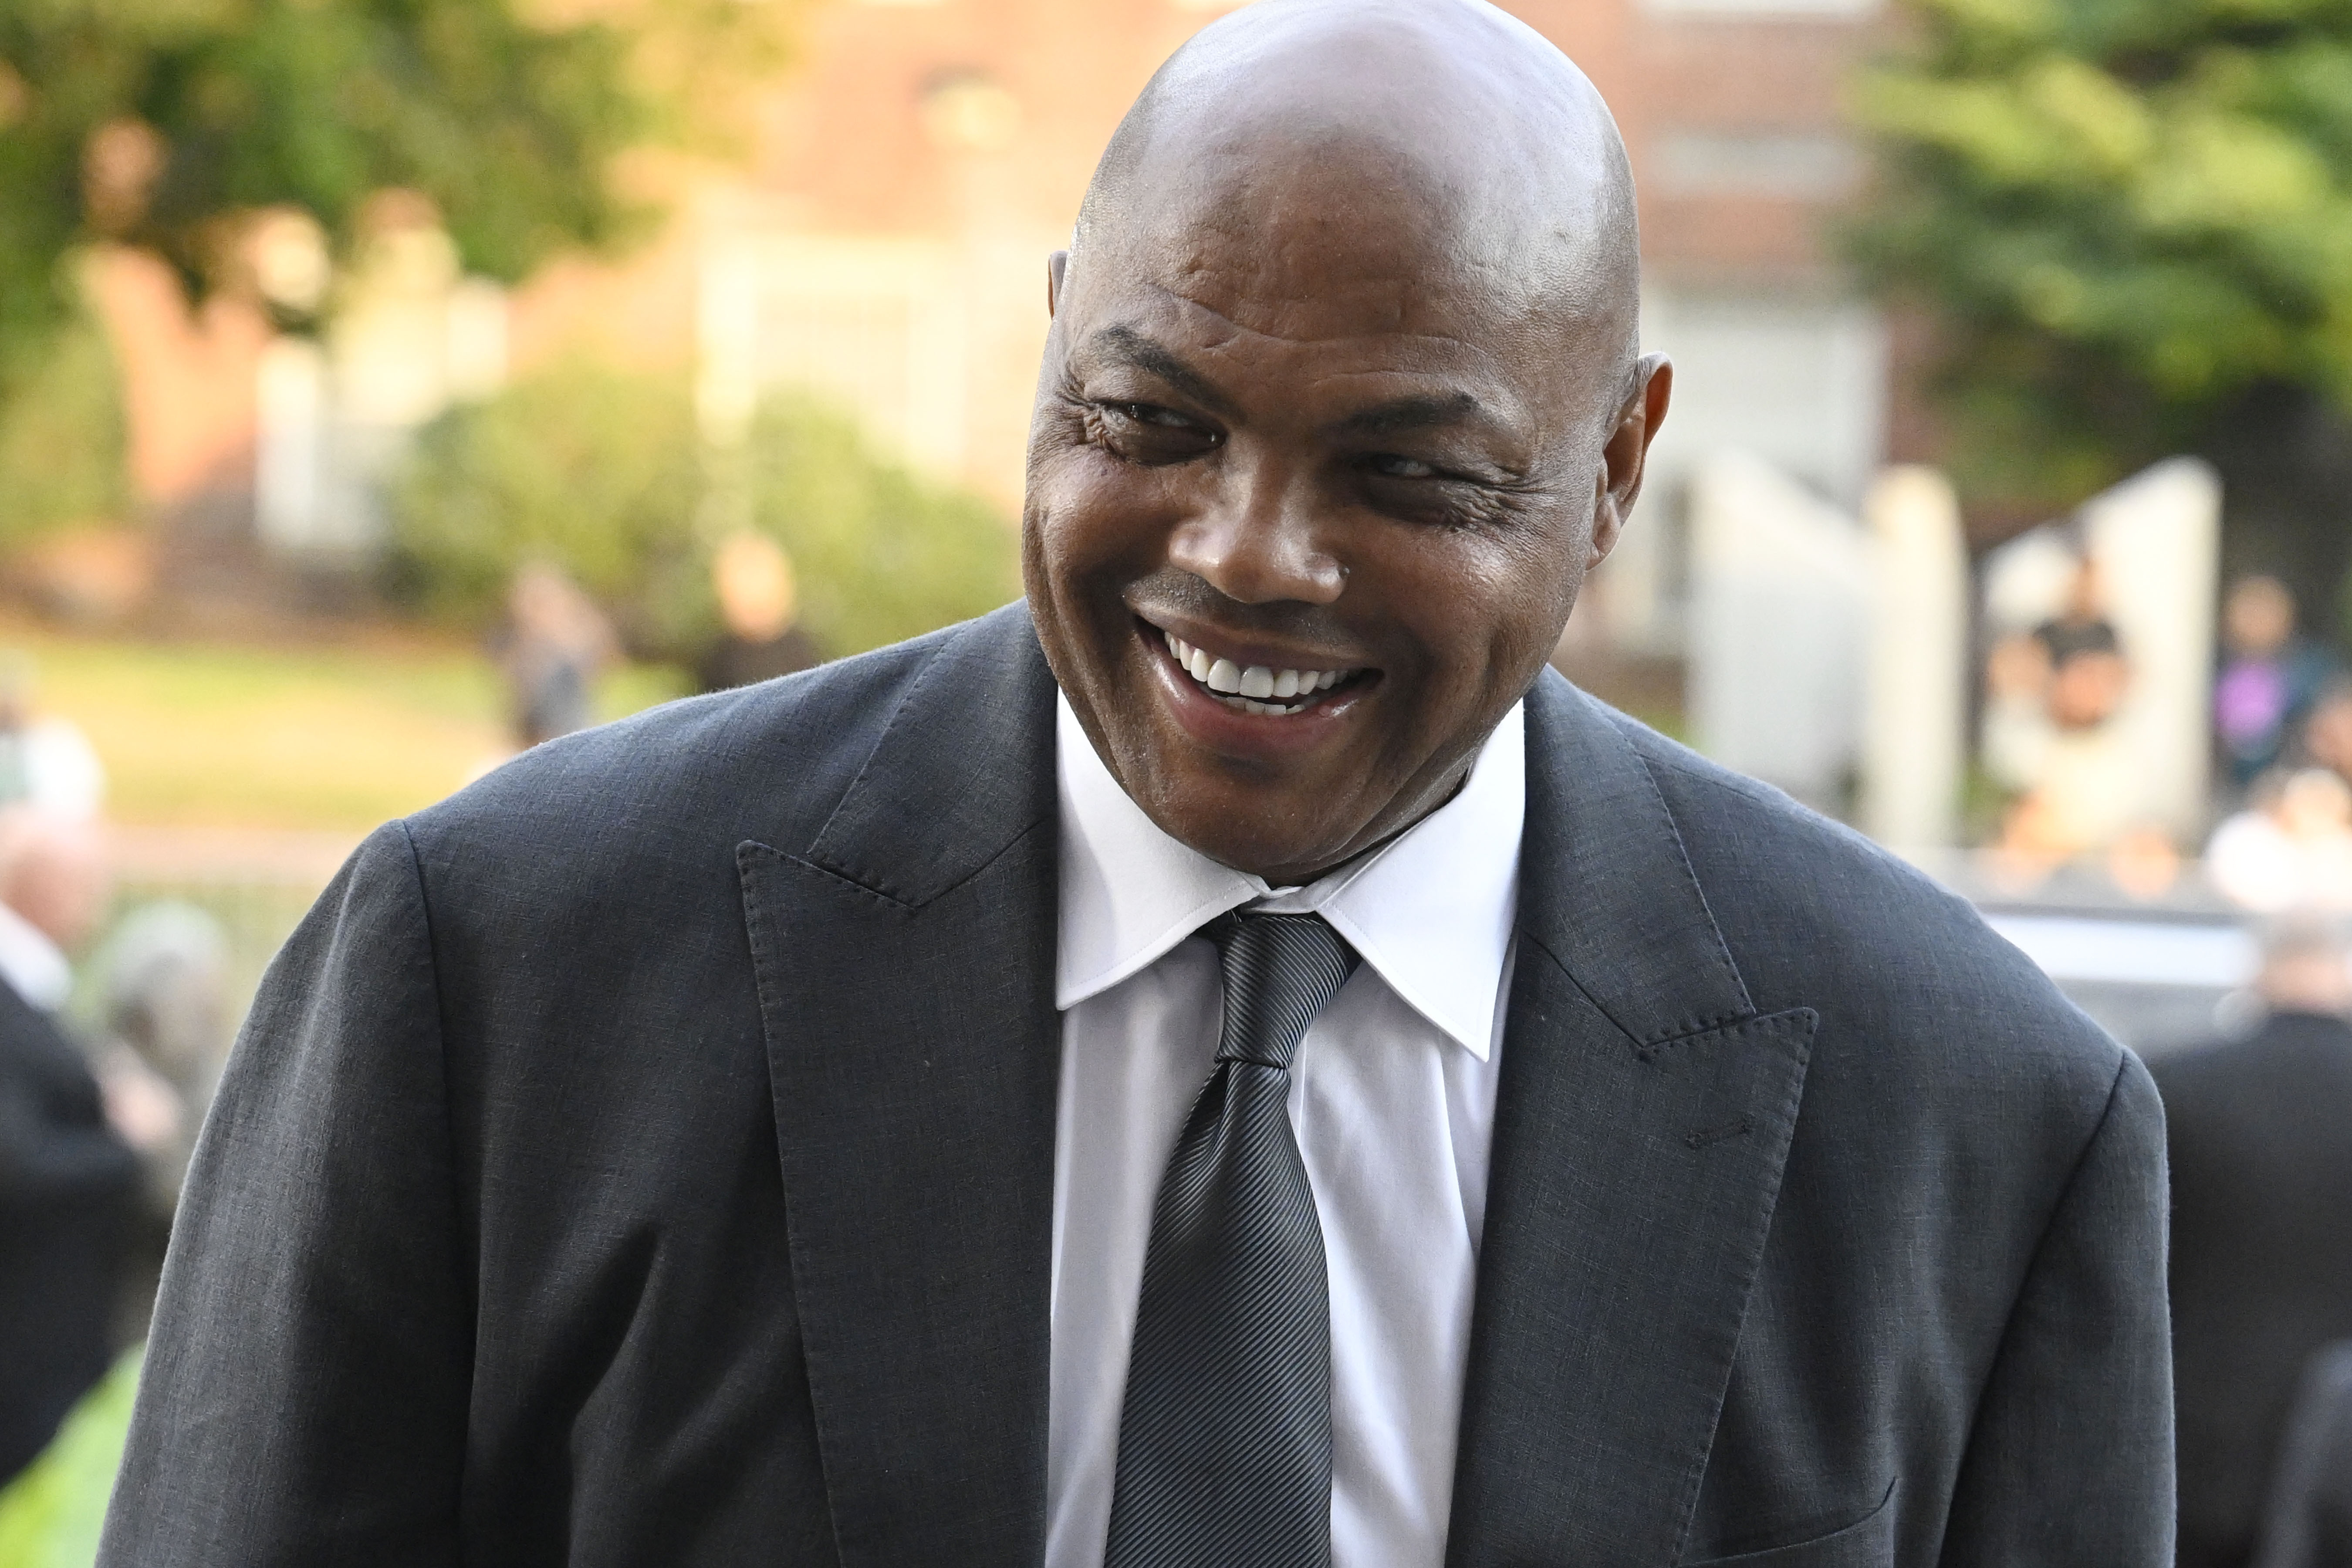 Charles Barkley will never quit 'Inside the NBA', says Shaq